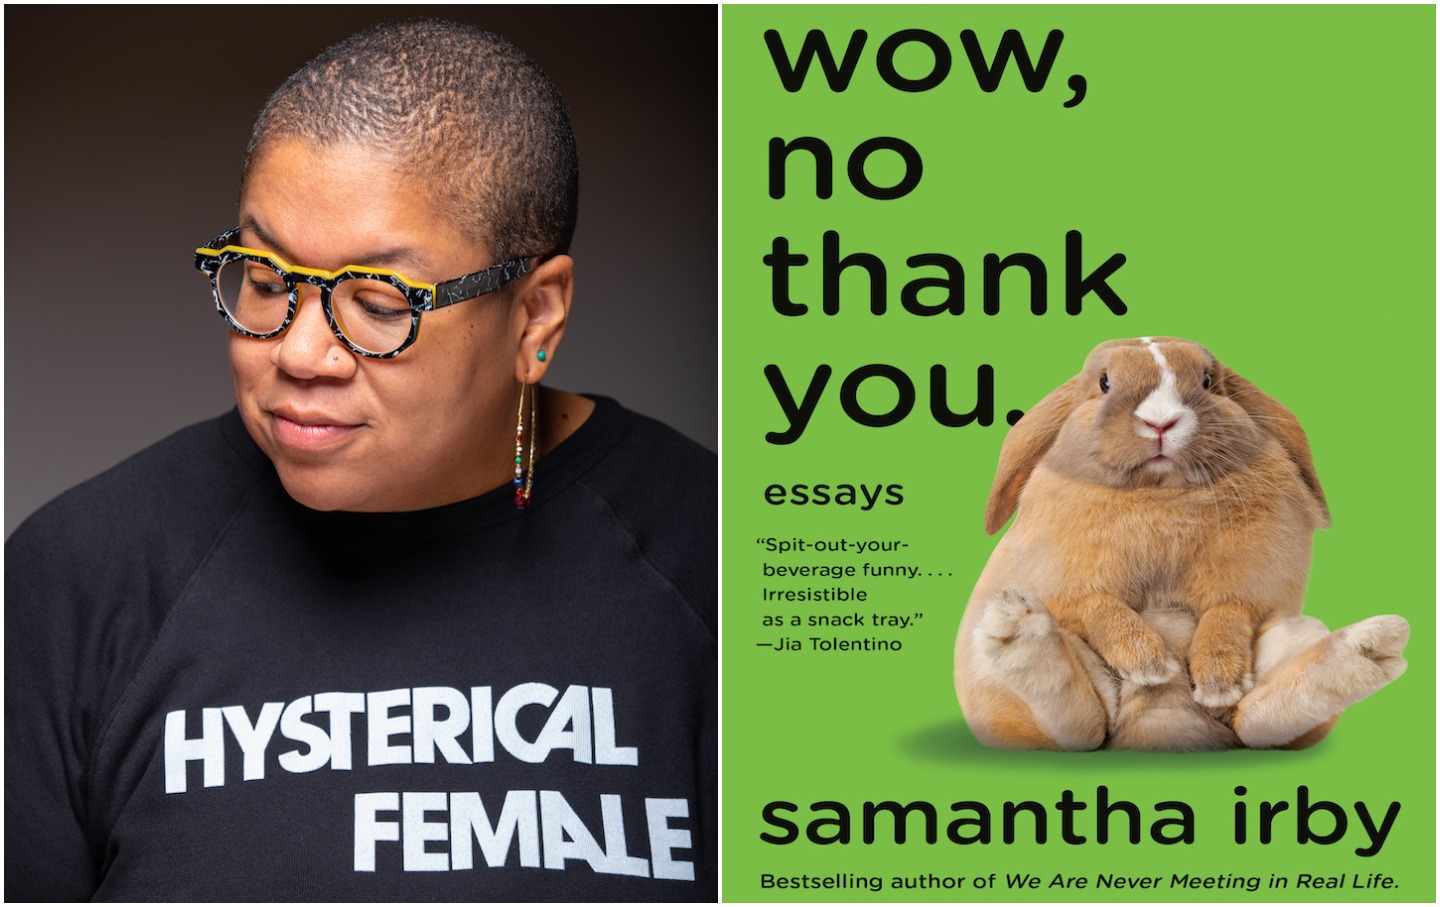 Finding Humor When ‘Shit Is So Terrible’: A Conversation With Samantha Irby